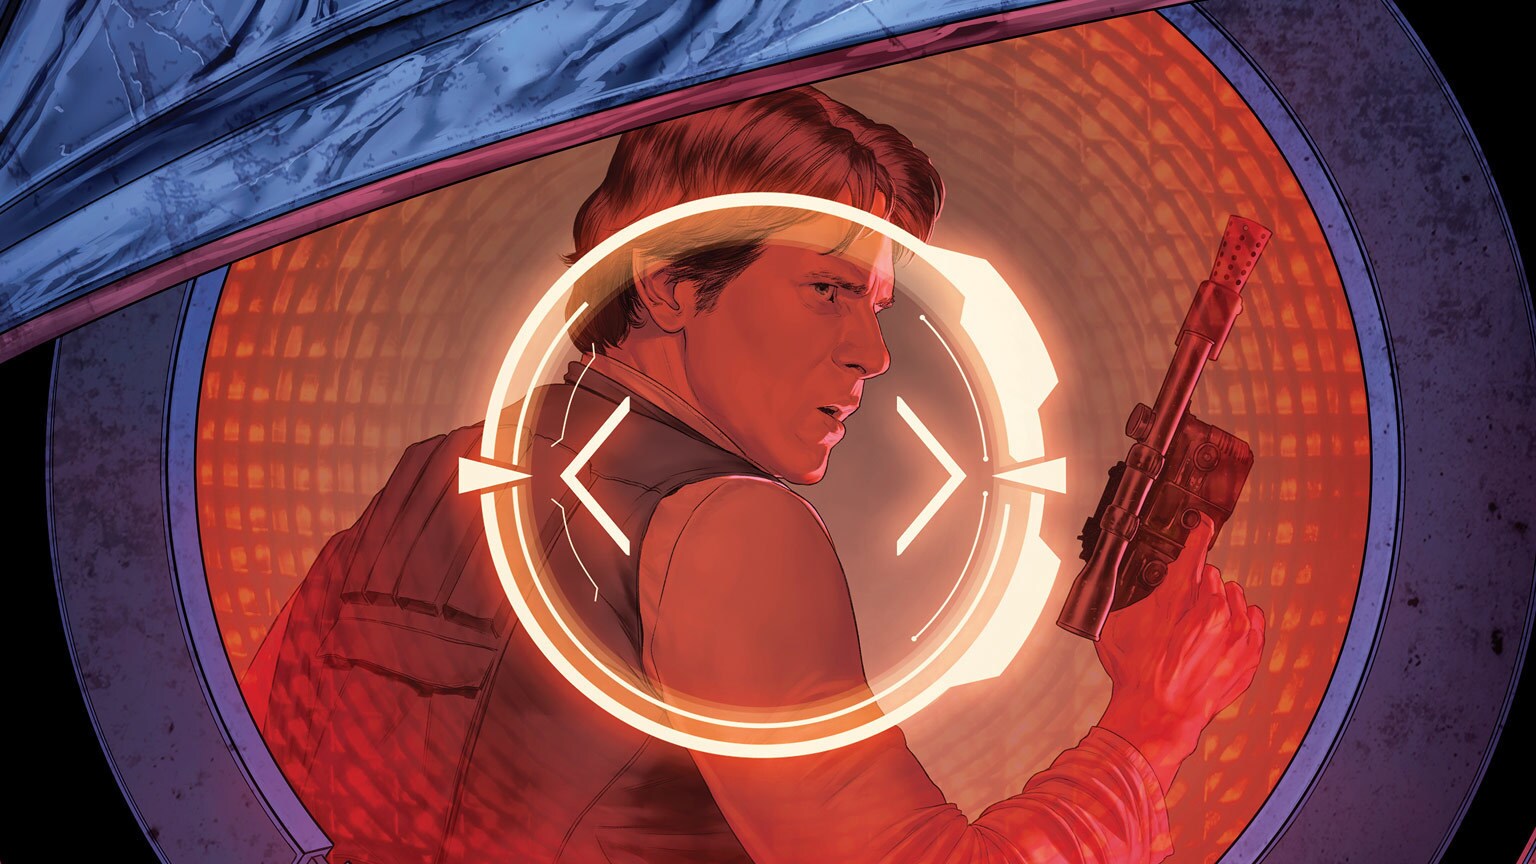 Han Solo Becomes the Target in Marvel’s Star Wars: Bounty Hunters #12 - Exclusive Preview